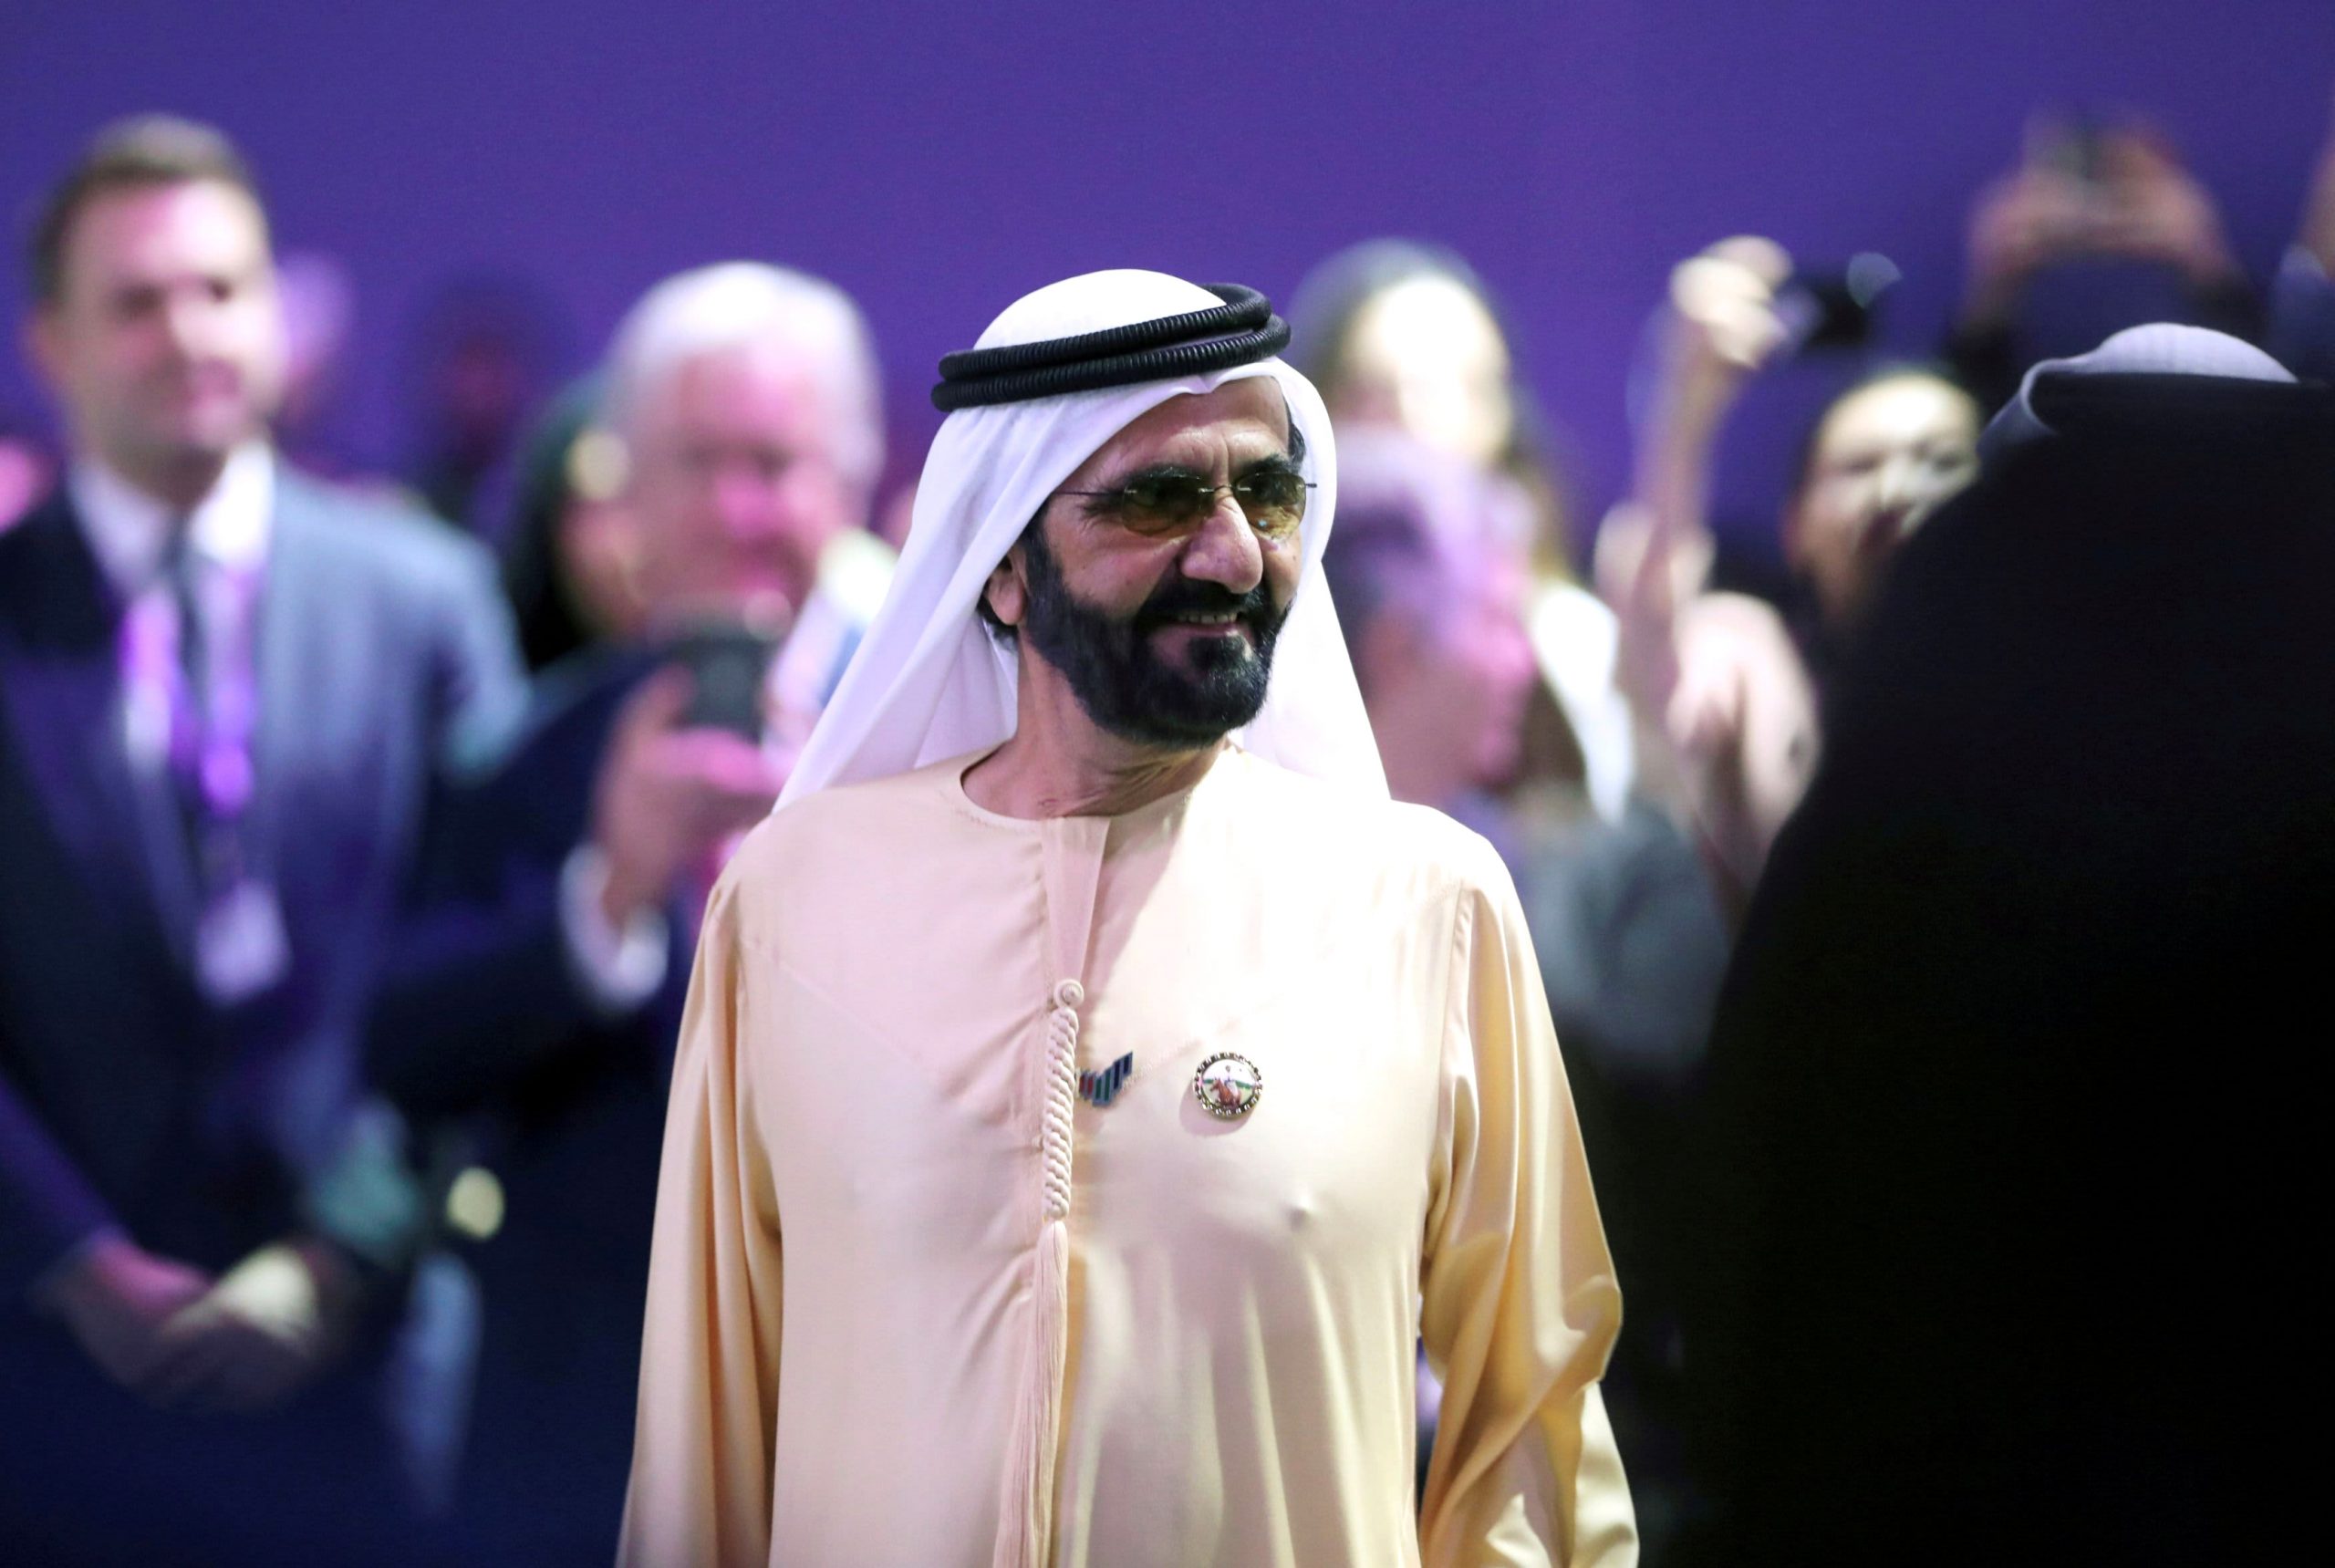 dubais sheikh mohammed ordered phones of ex wife and lawyers to be hacked uk court saysml